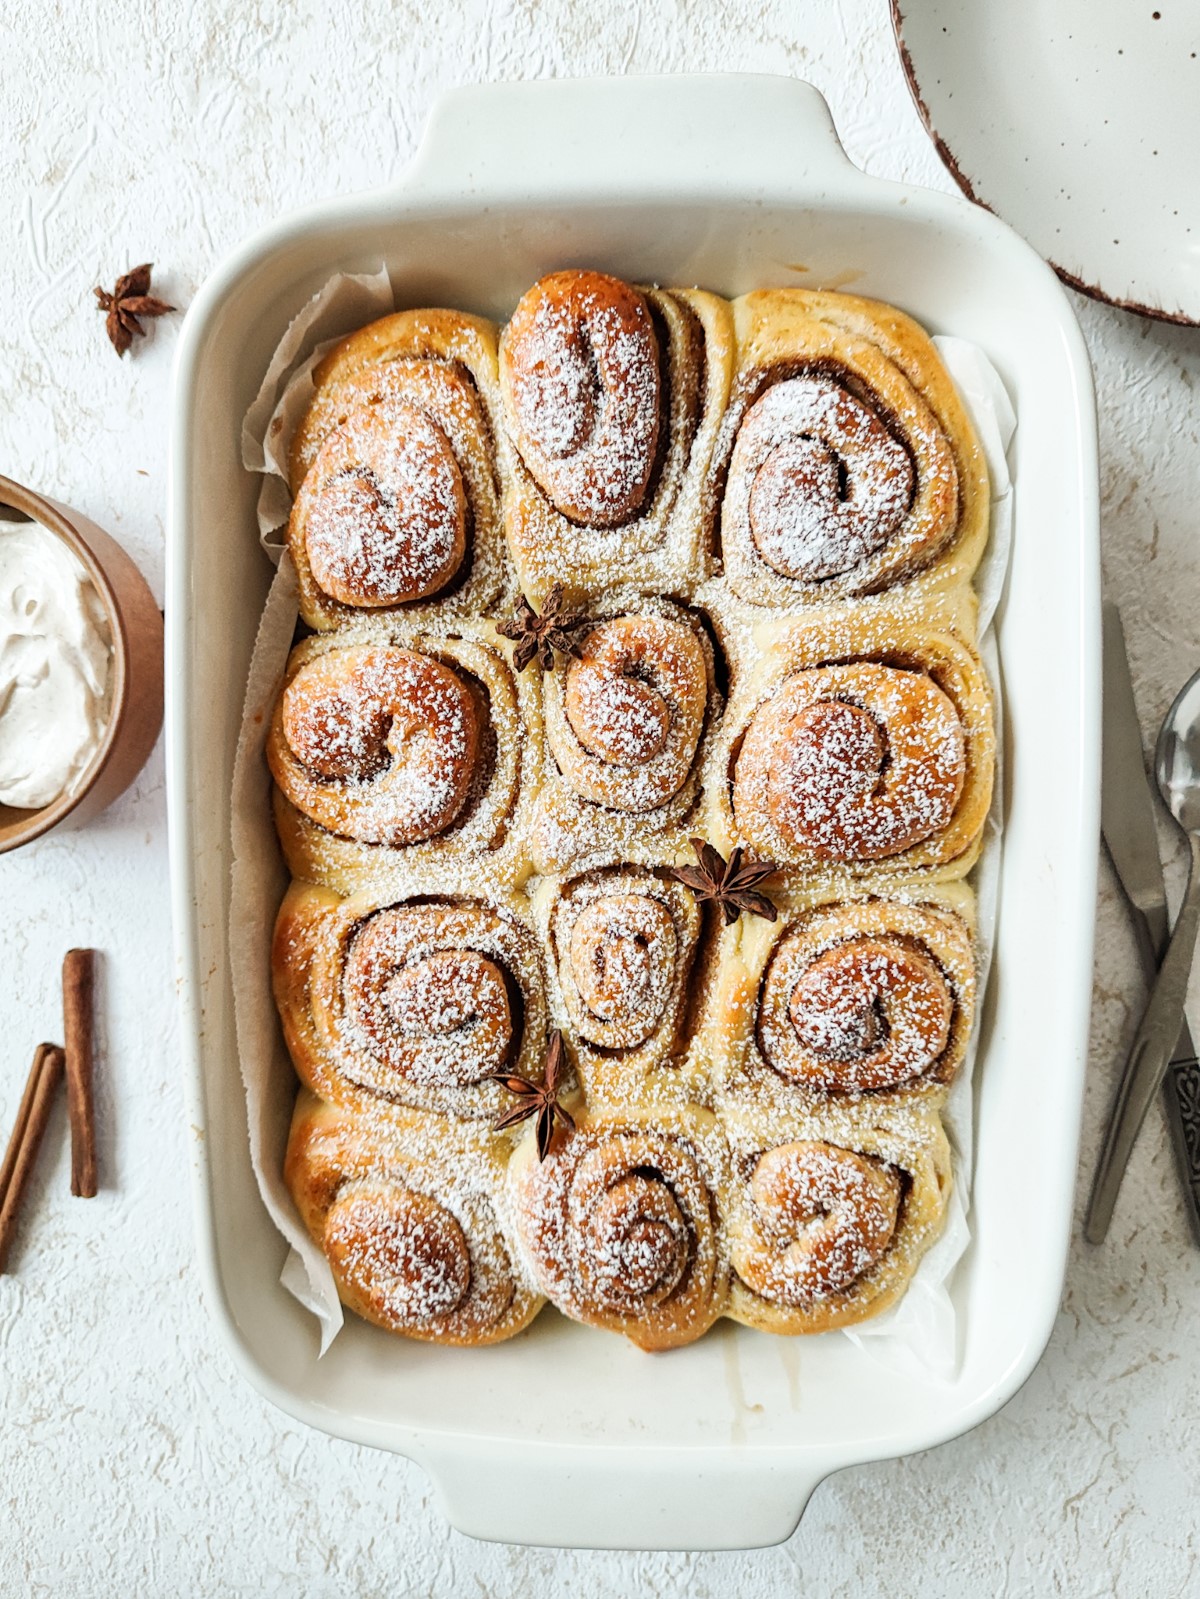 Milk Bread Cinnamon Rolls - Milk bread cinnamon rolls in a white baking tray